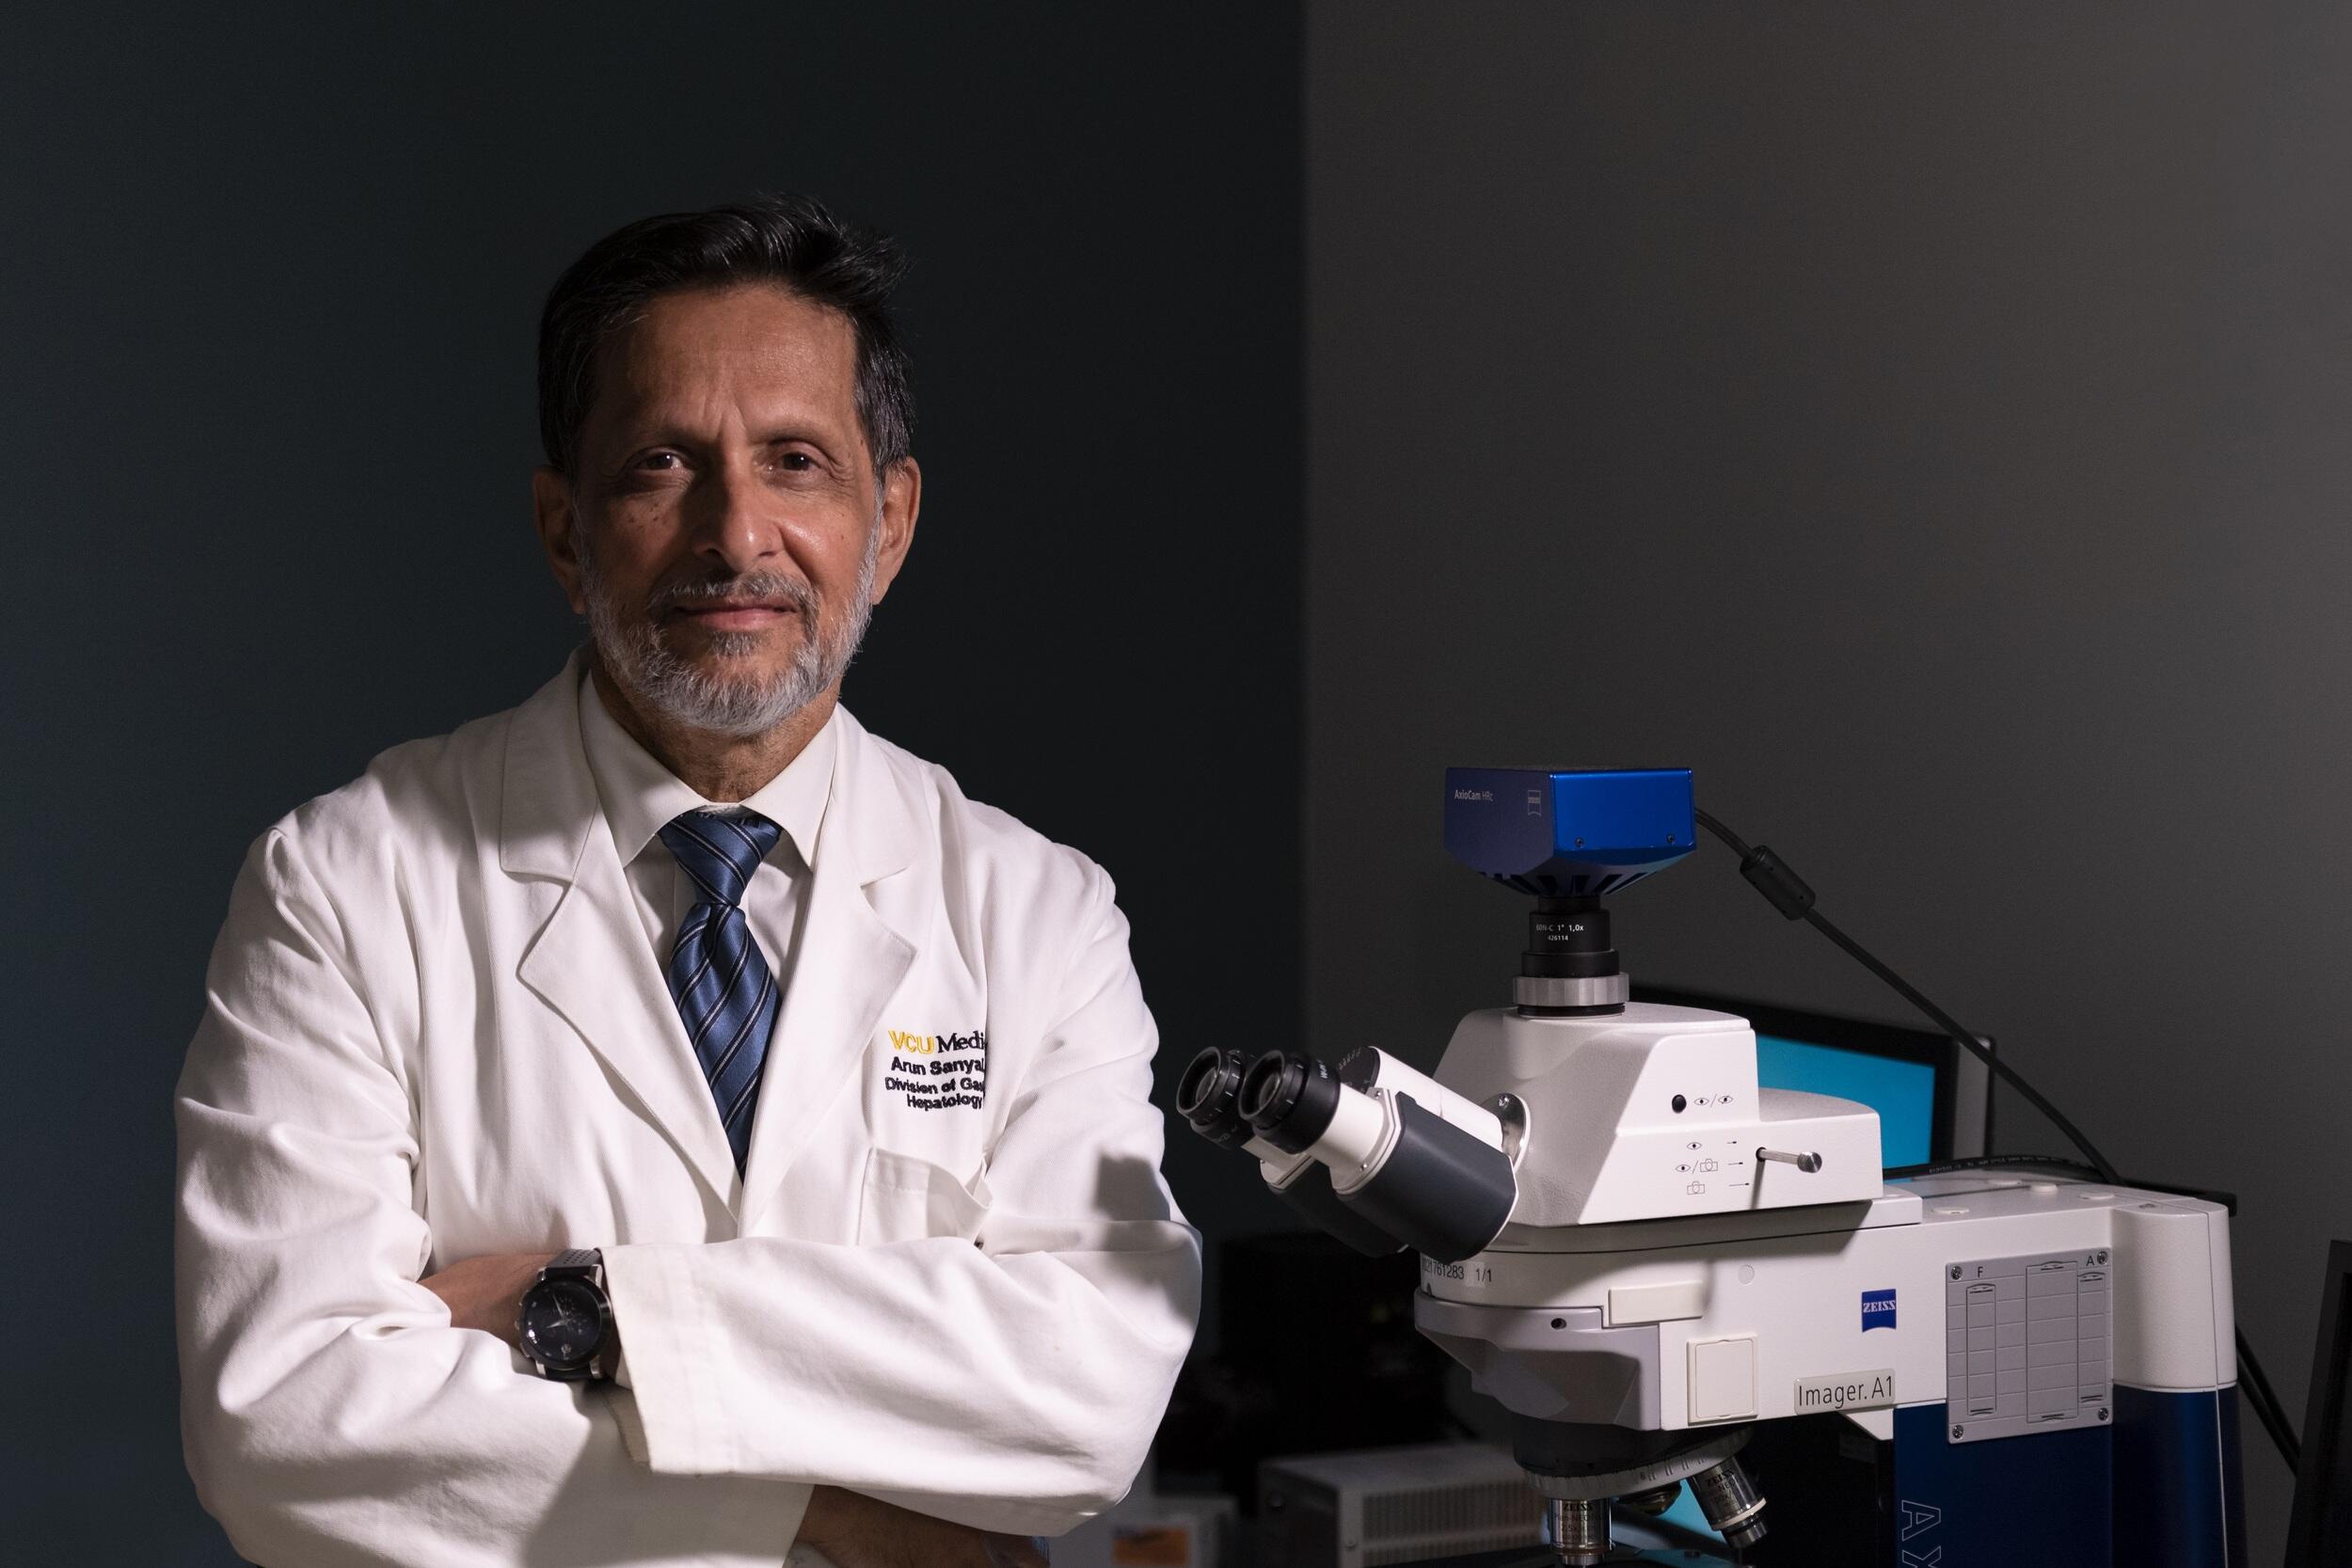 VCU liver institute leader earns No. 2 lifetime ranking worldwide for study of liver diseases